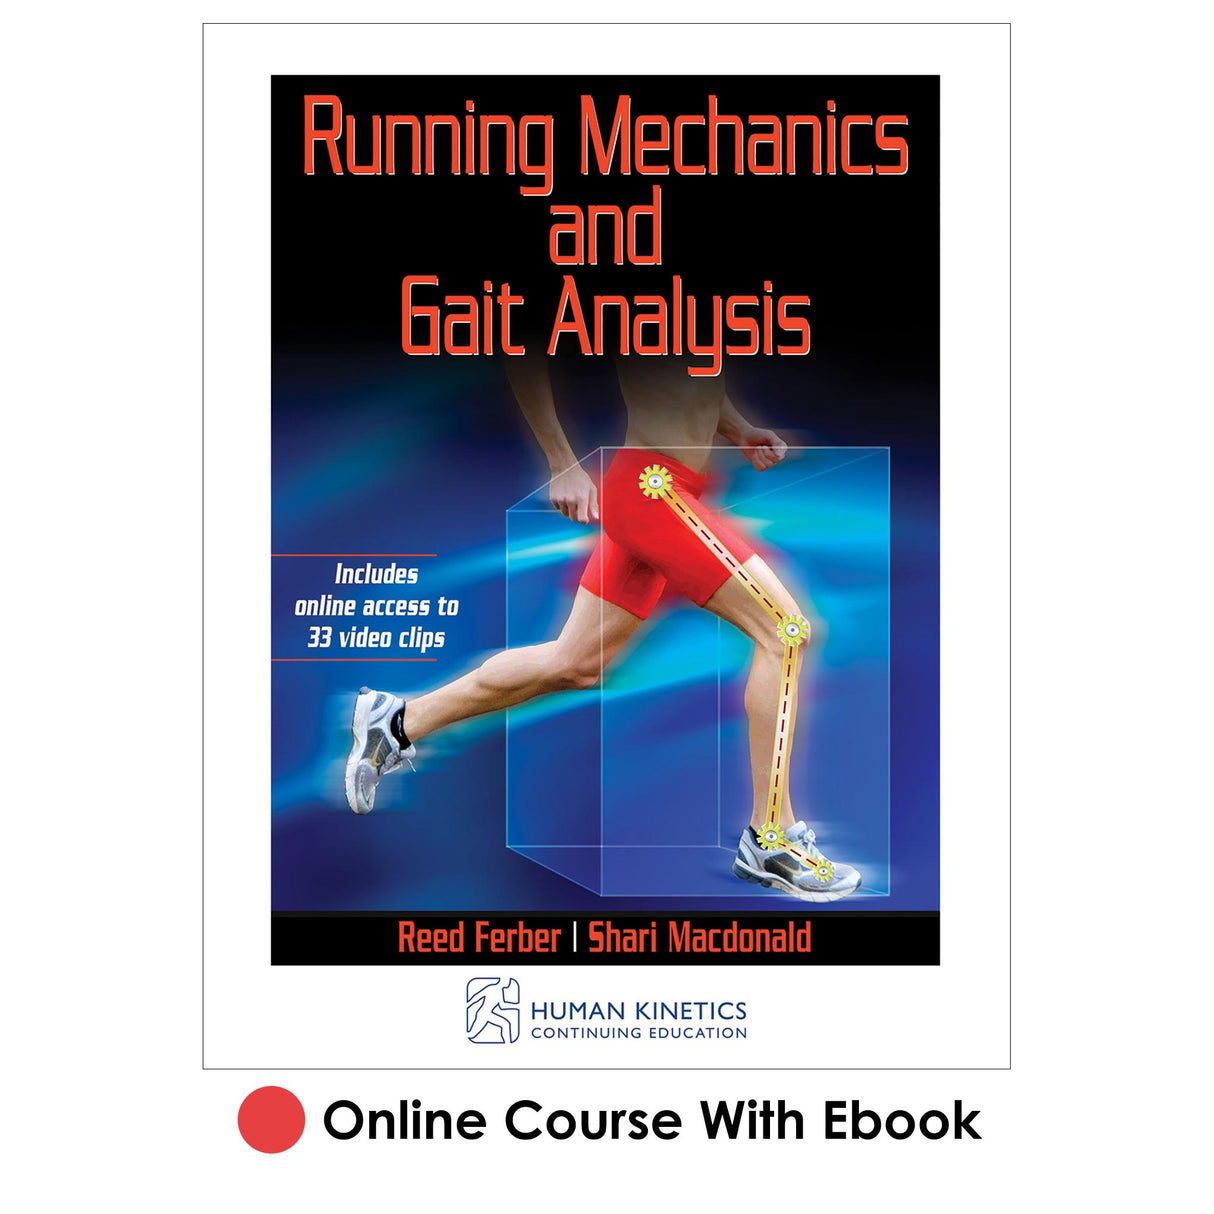 Running Mechanics and Gait Analysis Online CE Course With Ebook